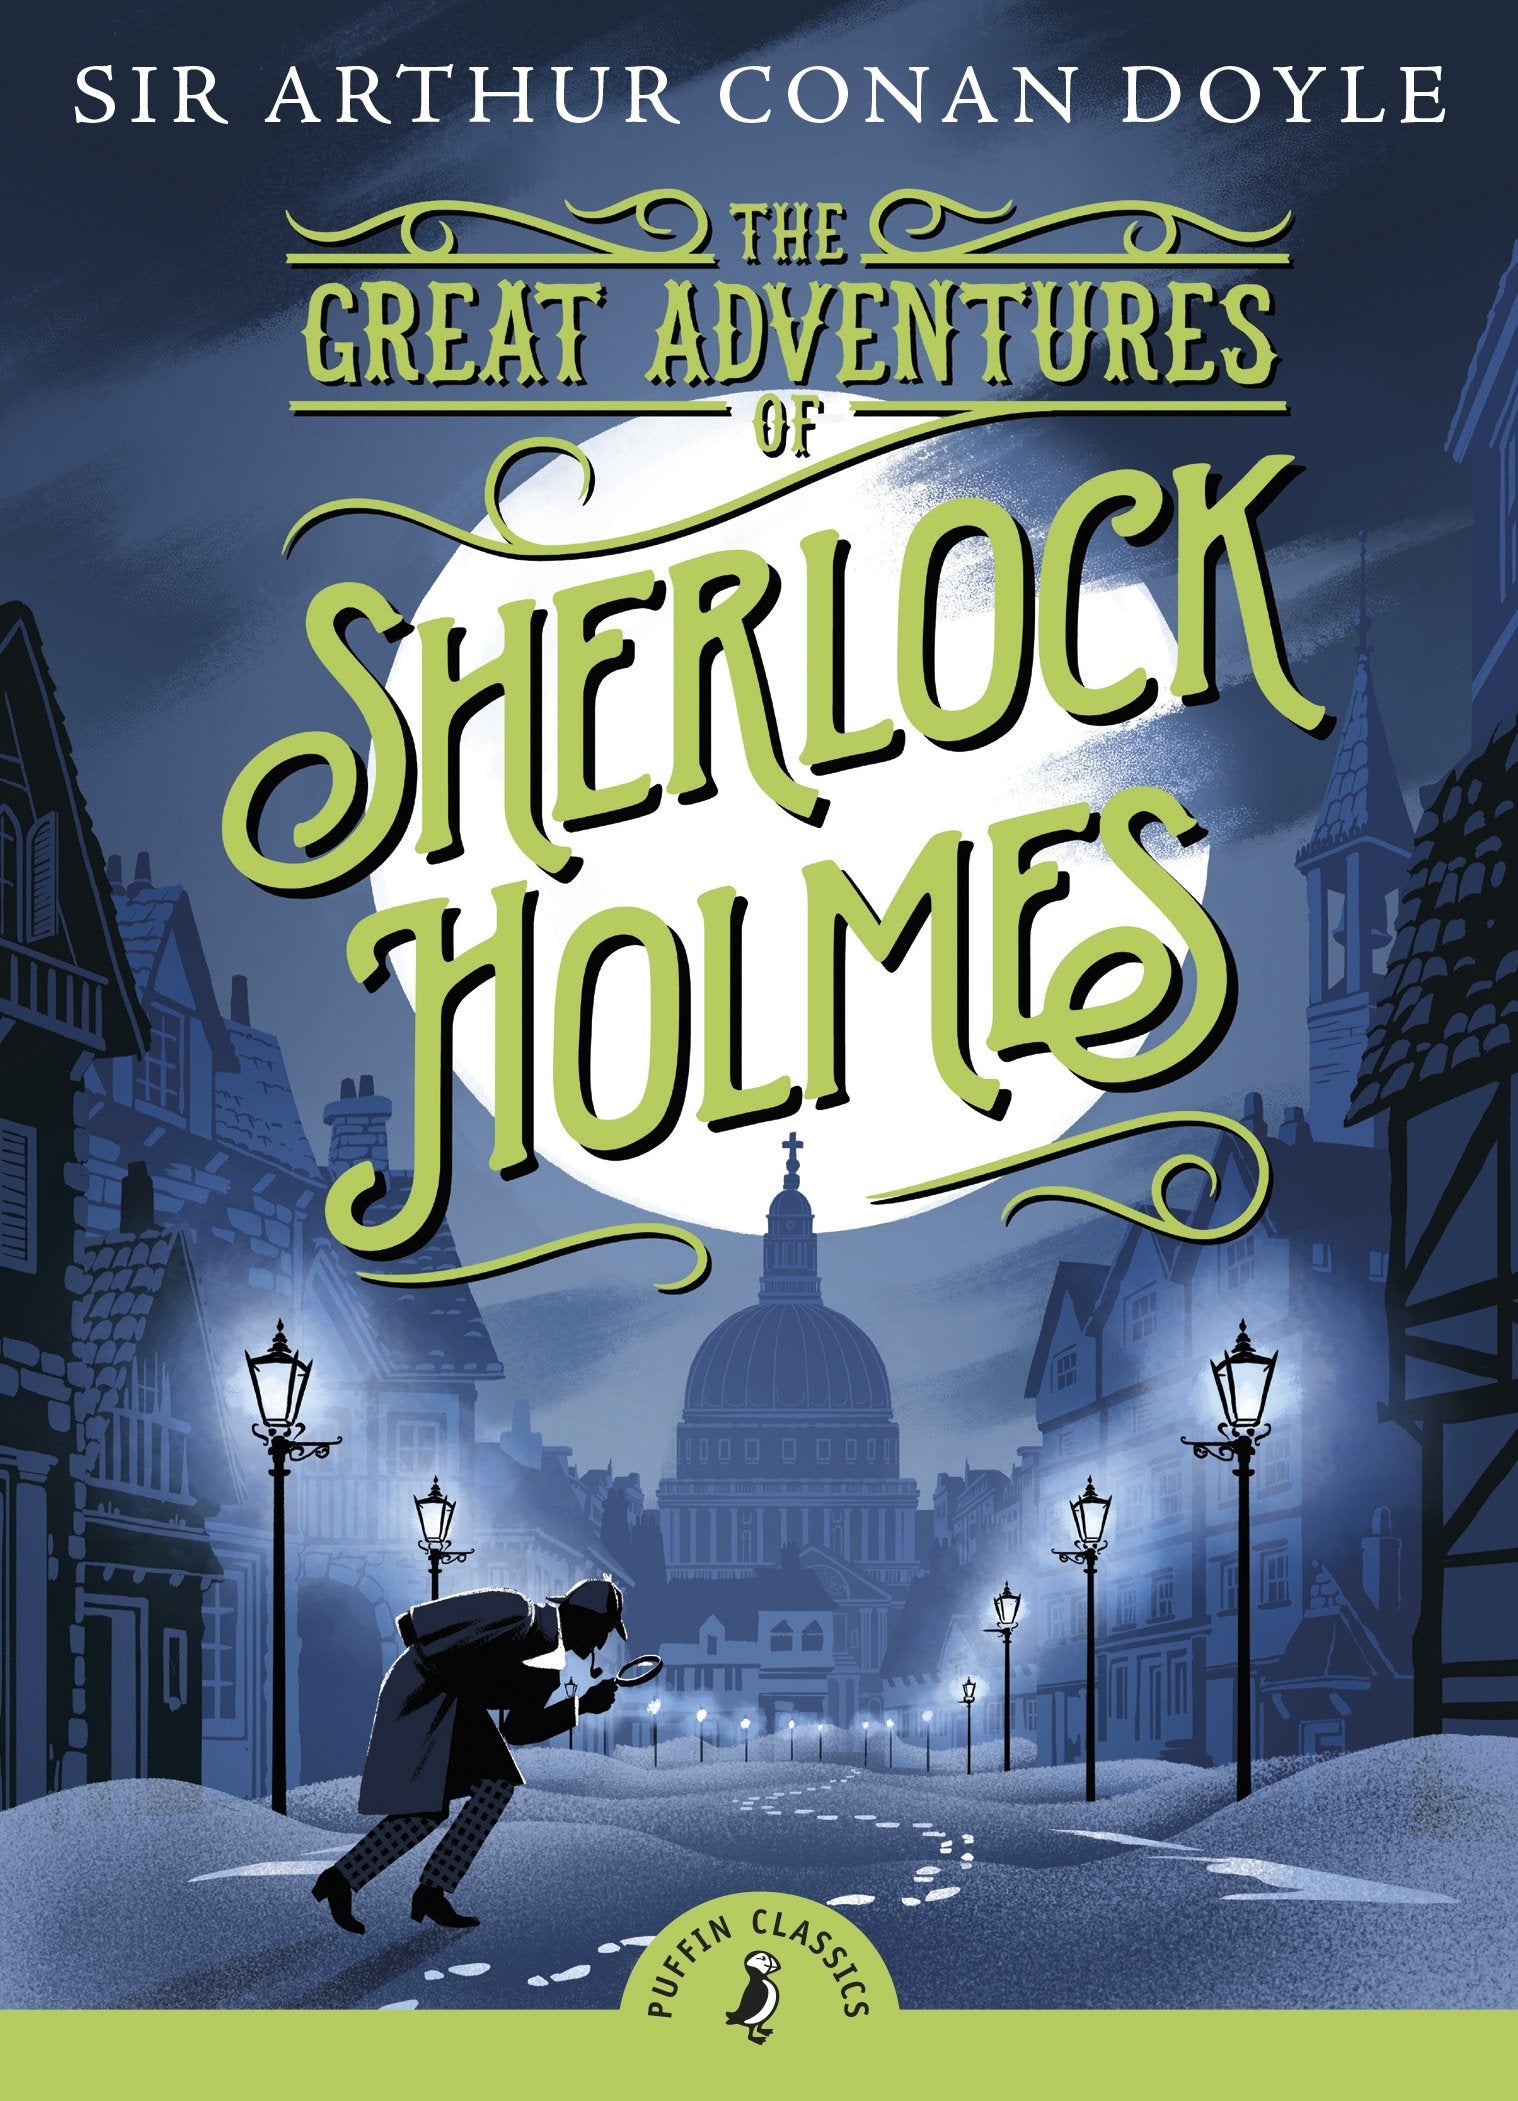 THE GREAT ADVENTURES OF SHERLOCK HOLMES